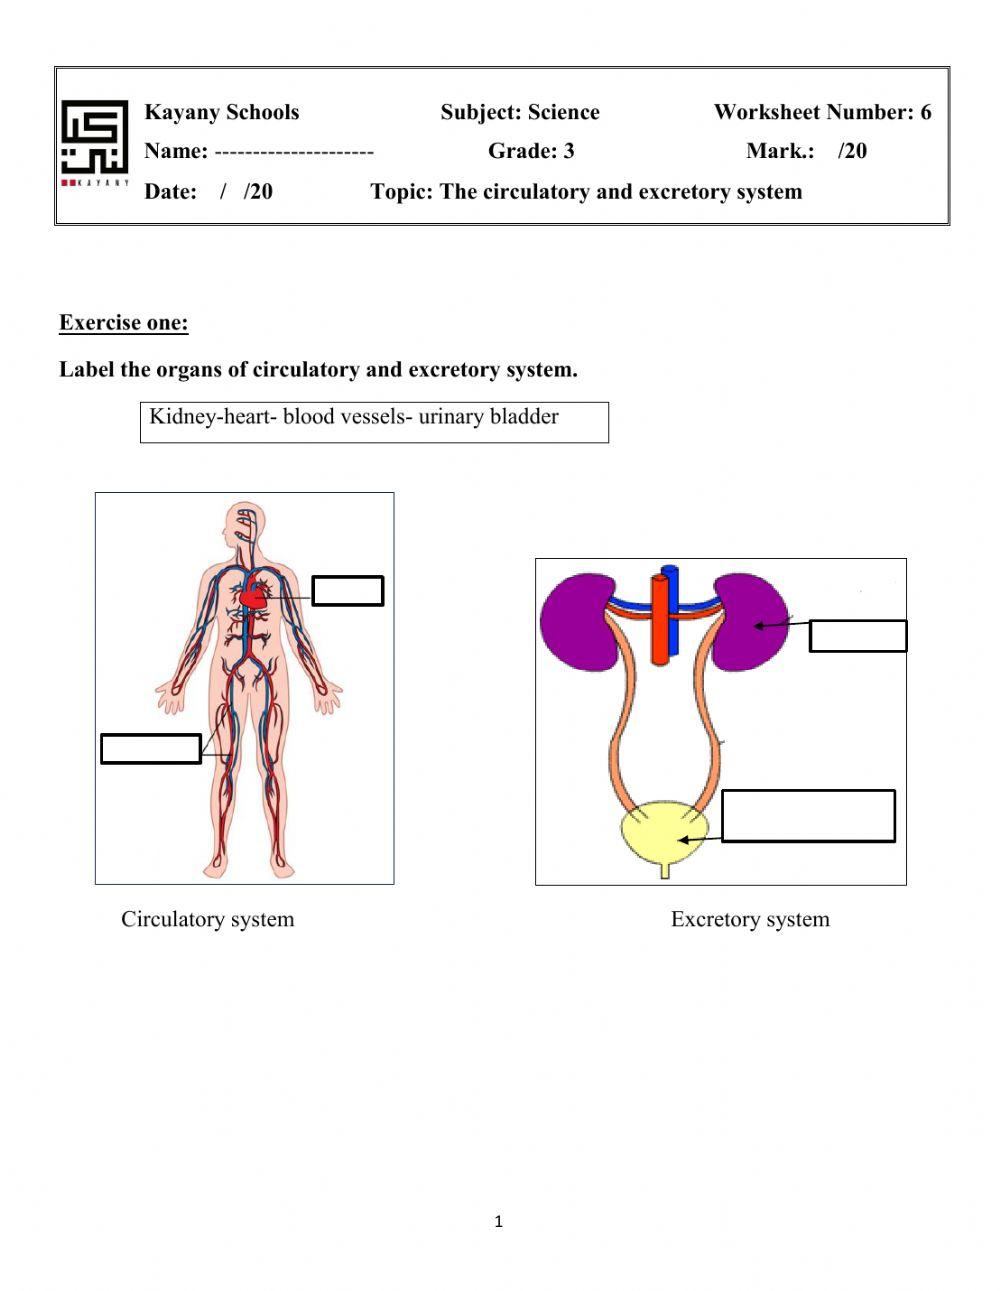 The Circulatory and Excretory Systems